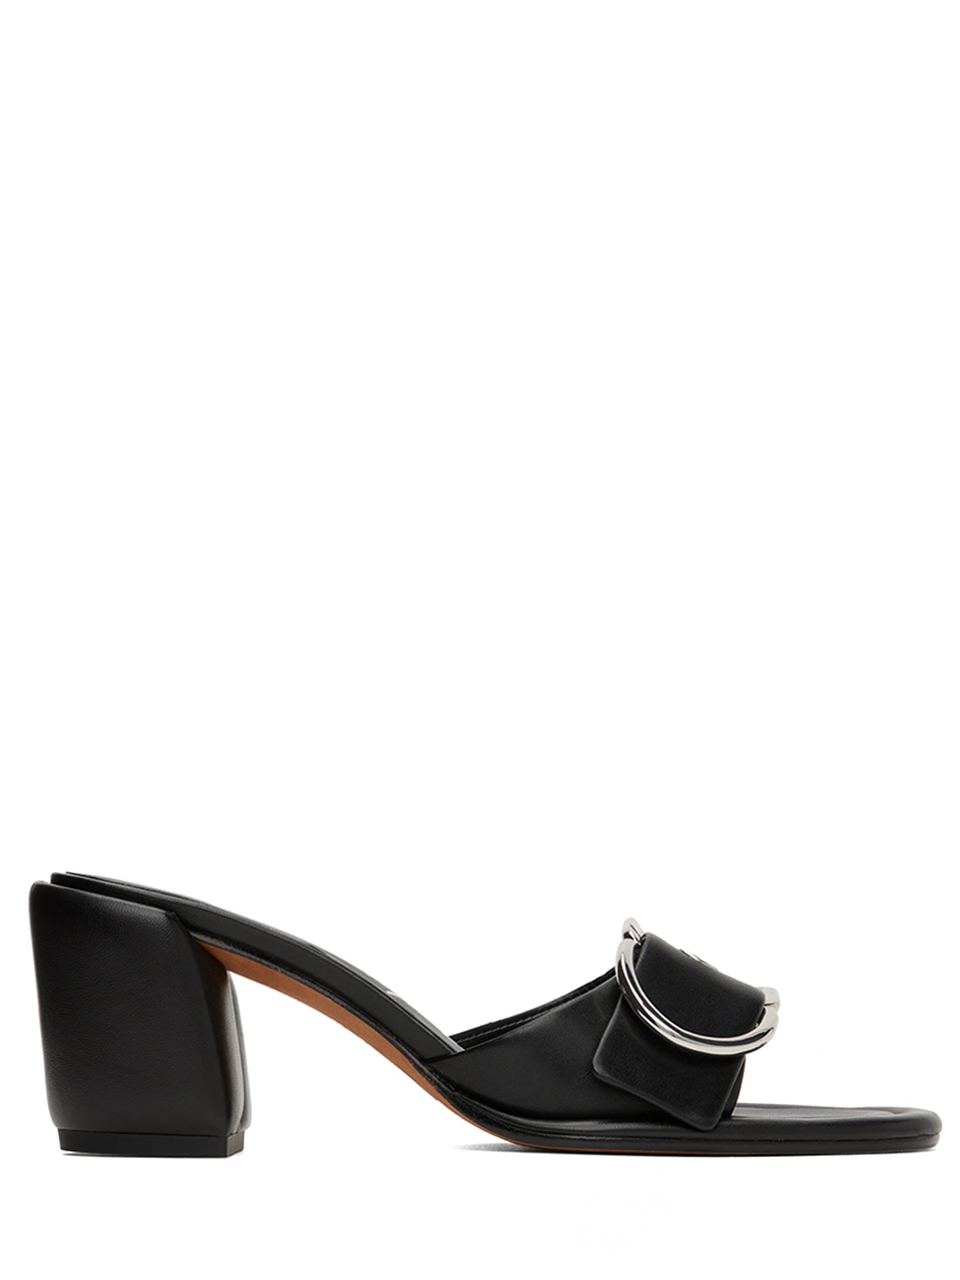 3.1 Phillip Lim Naomi Mule with Buckle in Black Side View